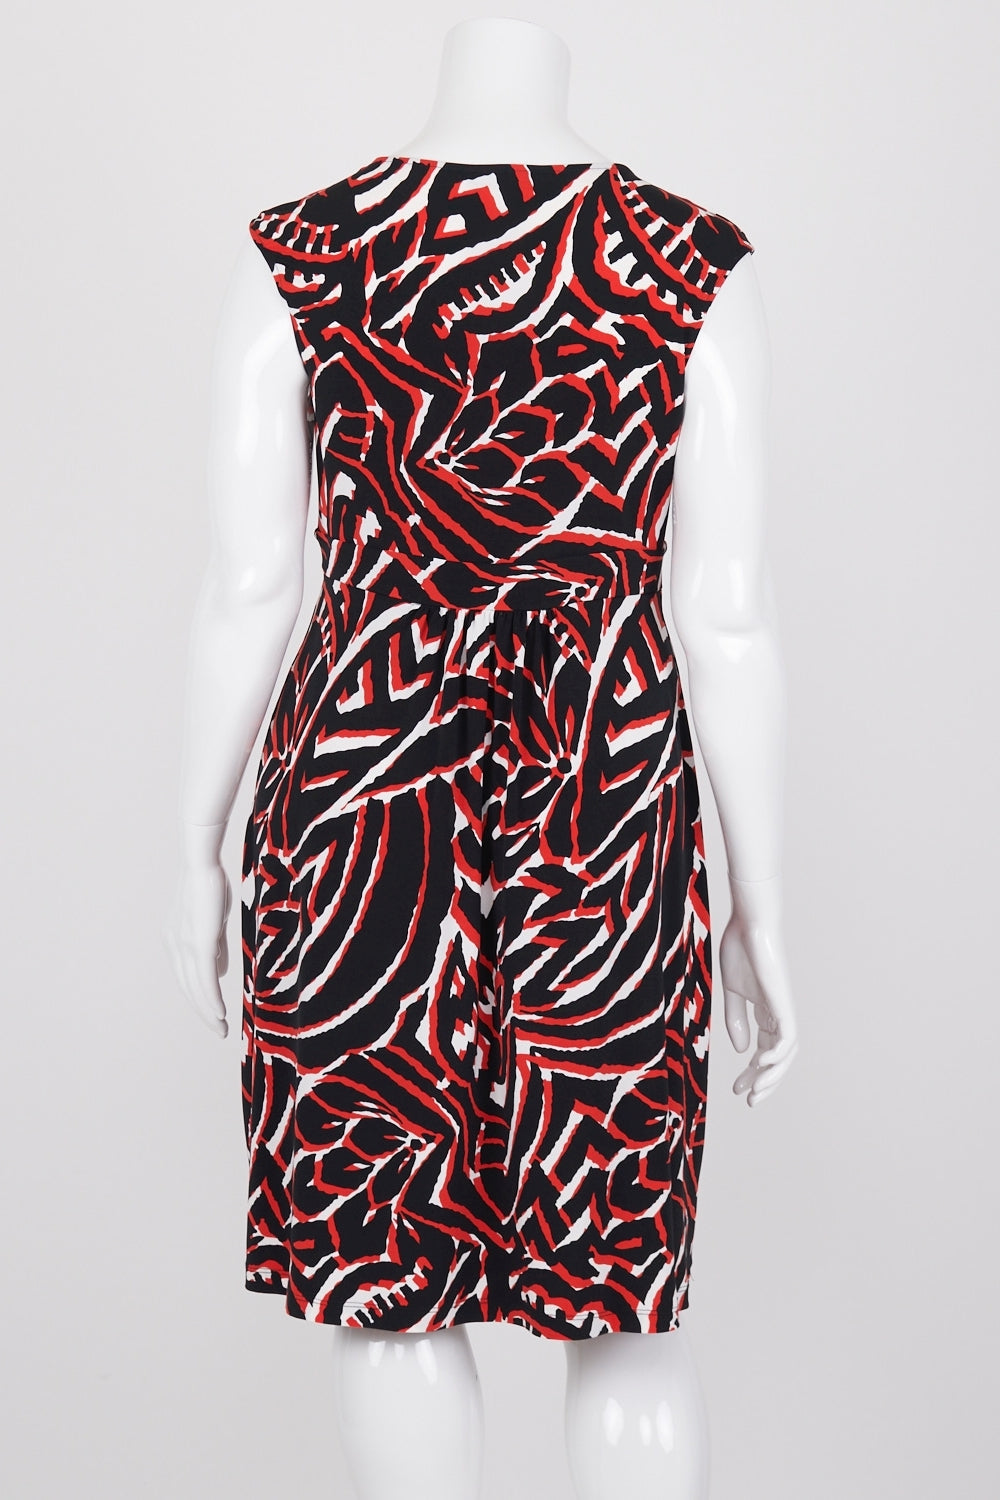 Basque Red, Black and White Patterned Sleeveless Dress 14